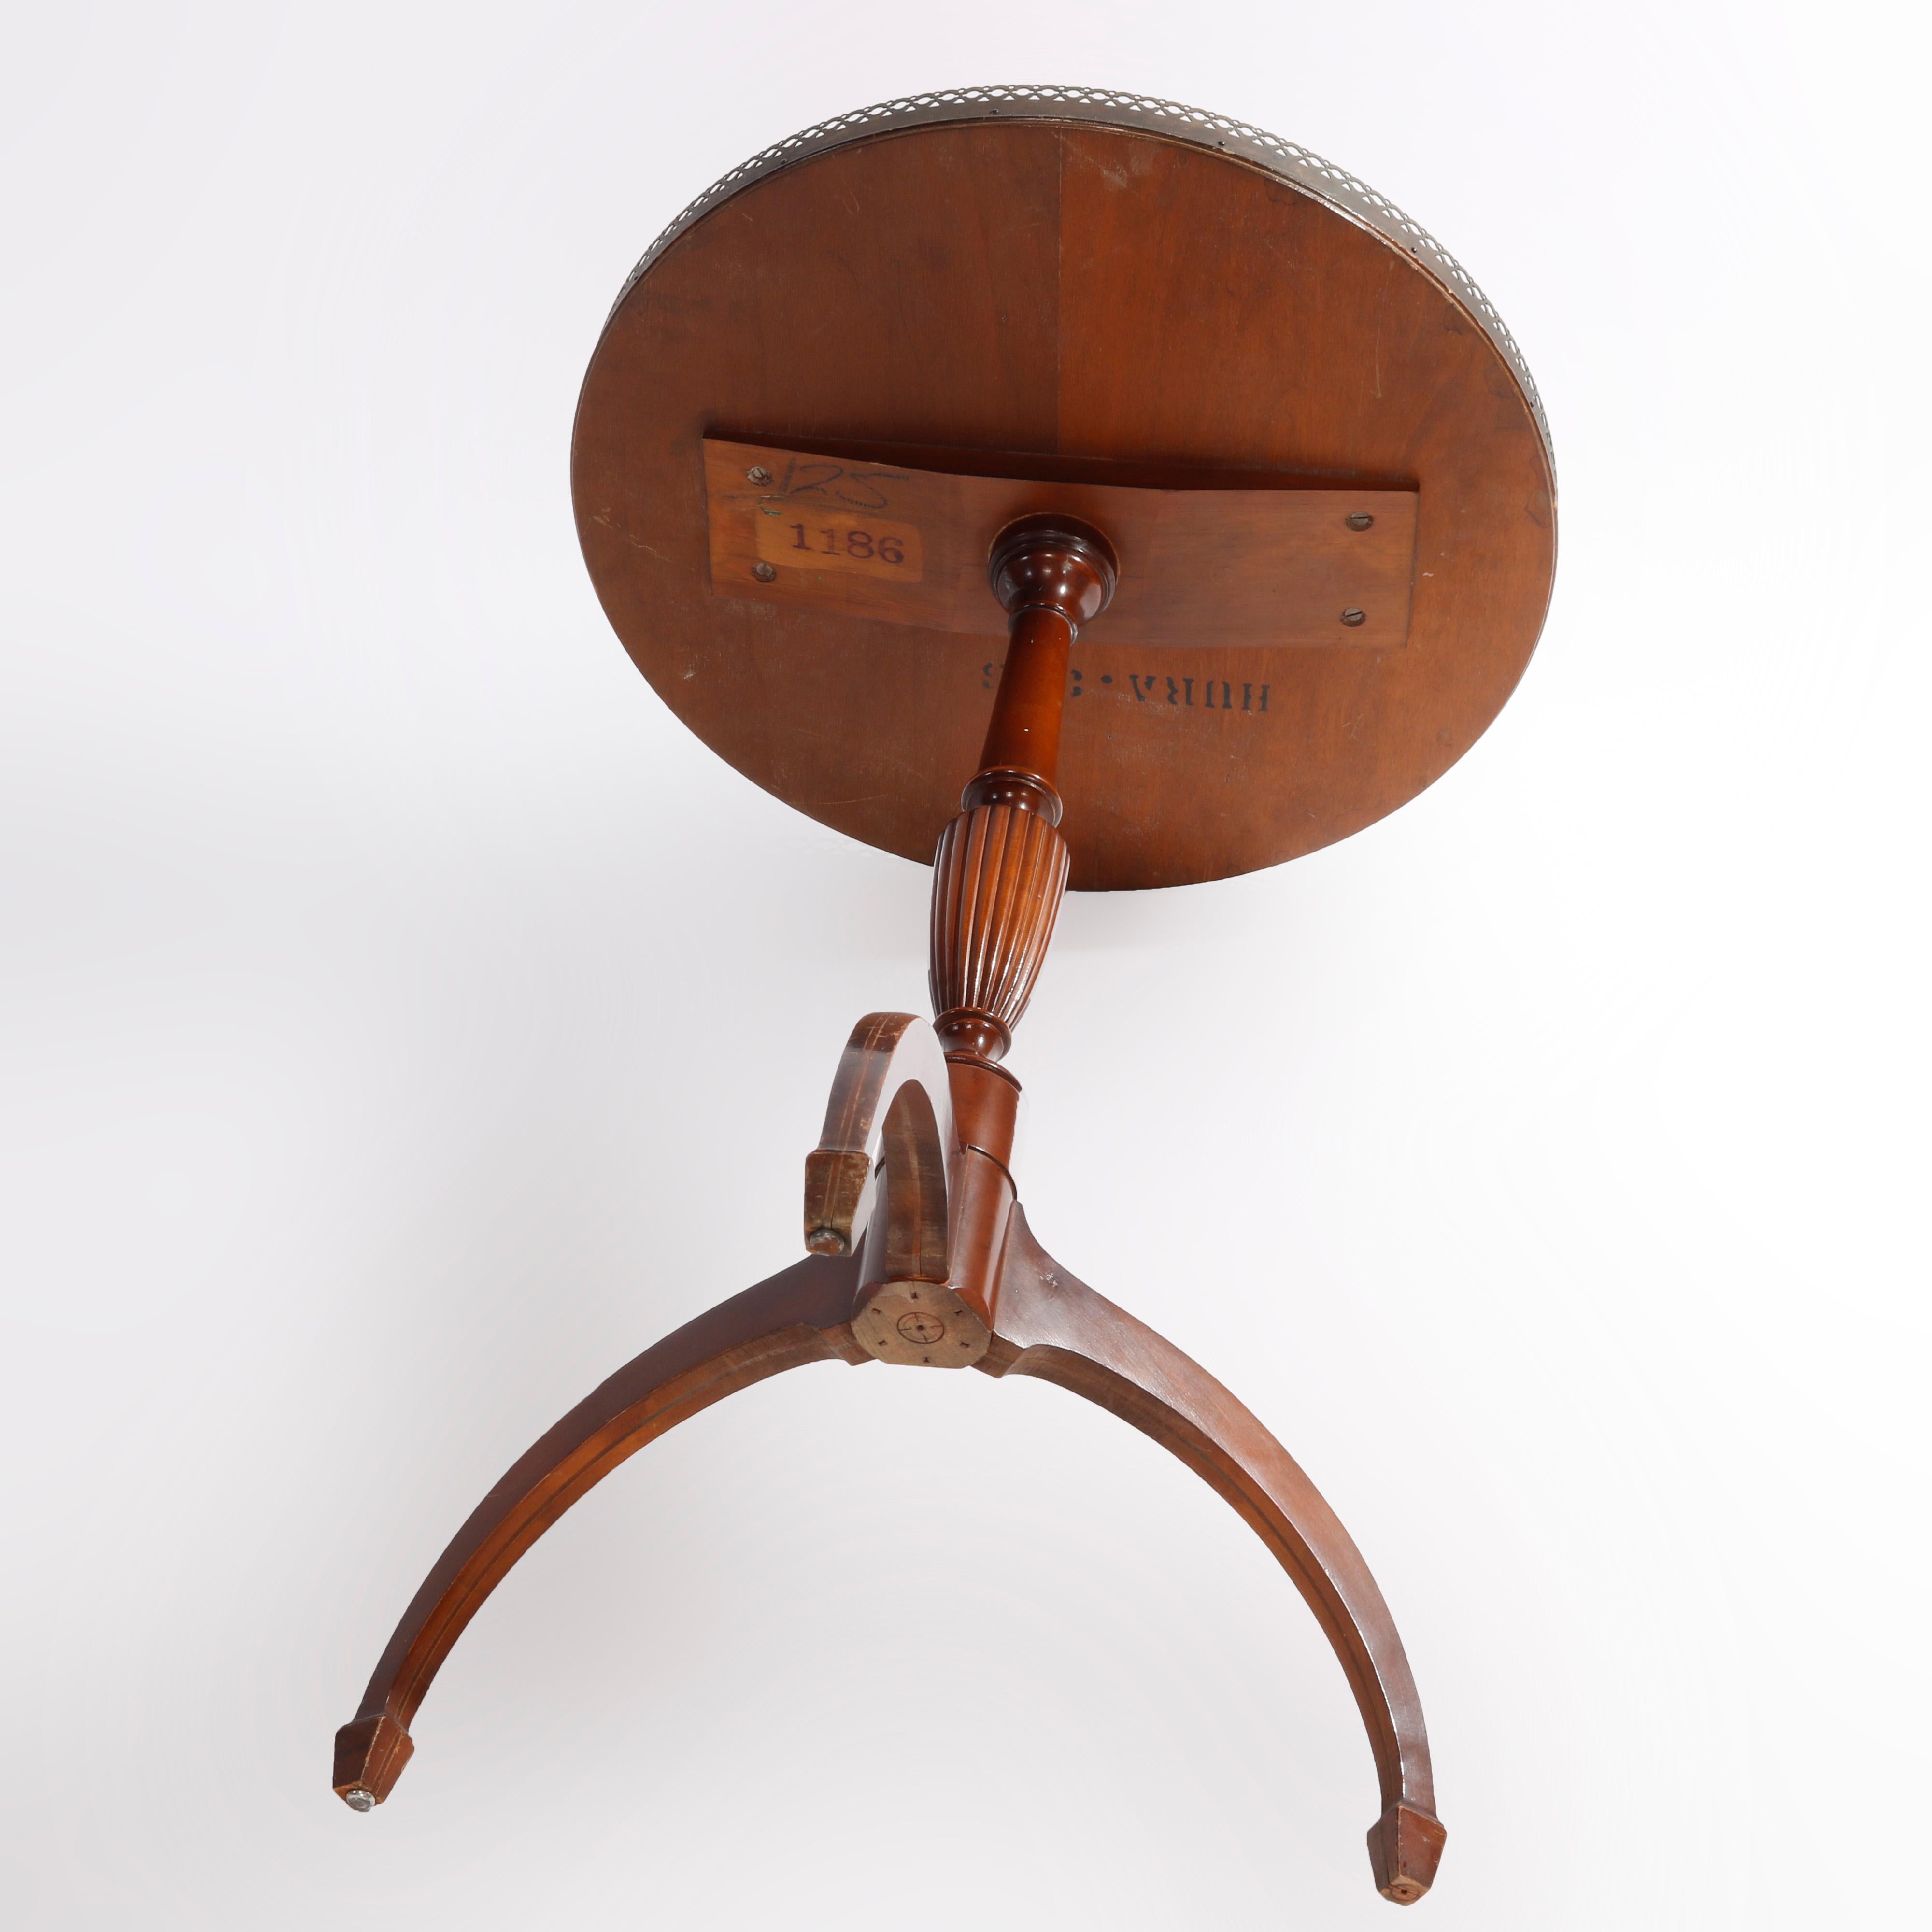 20th Century English Regency Mahogany Spider Leg Parlor Table with Inlay Shell Center, c1930 For Sale